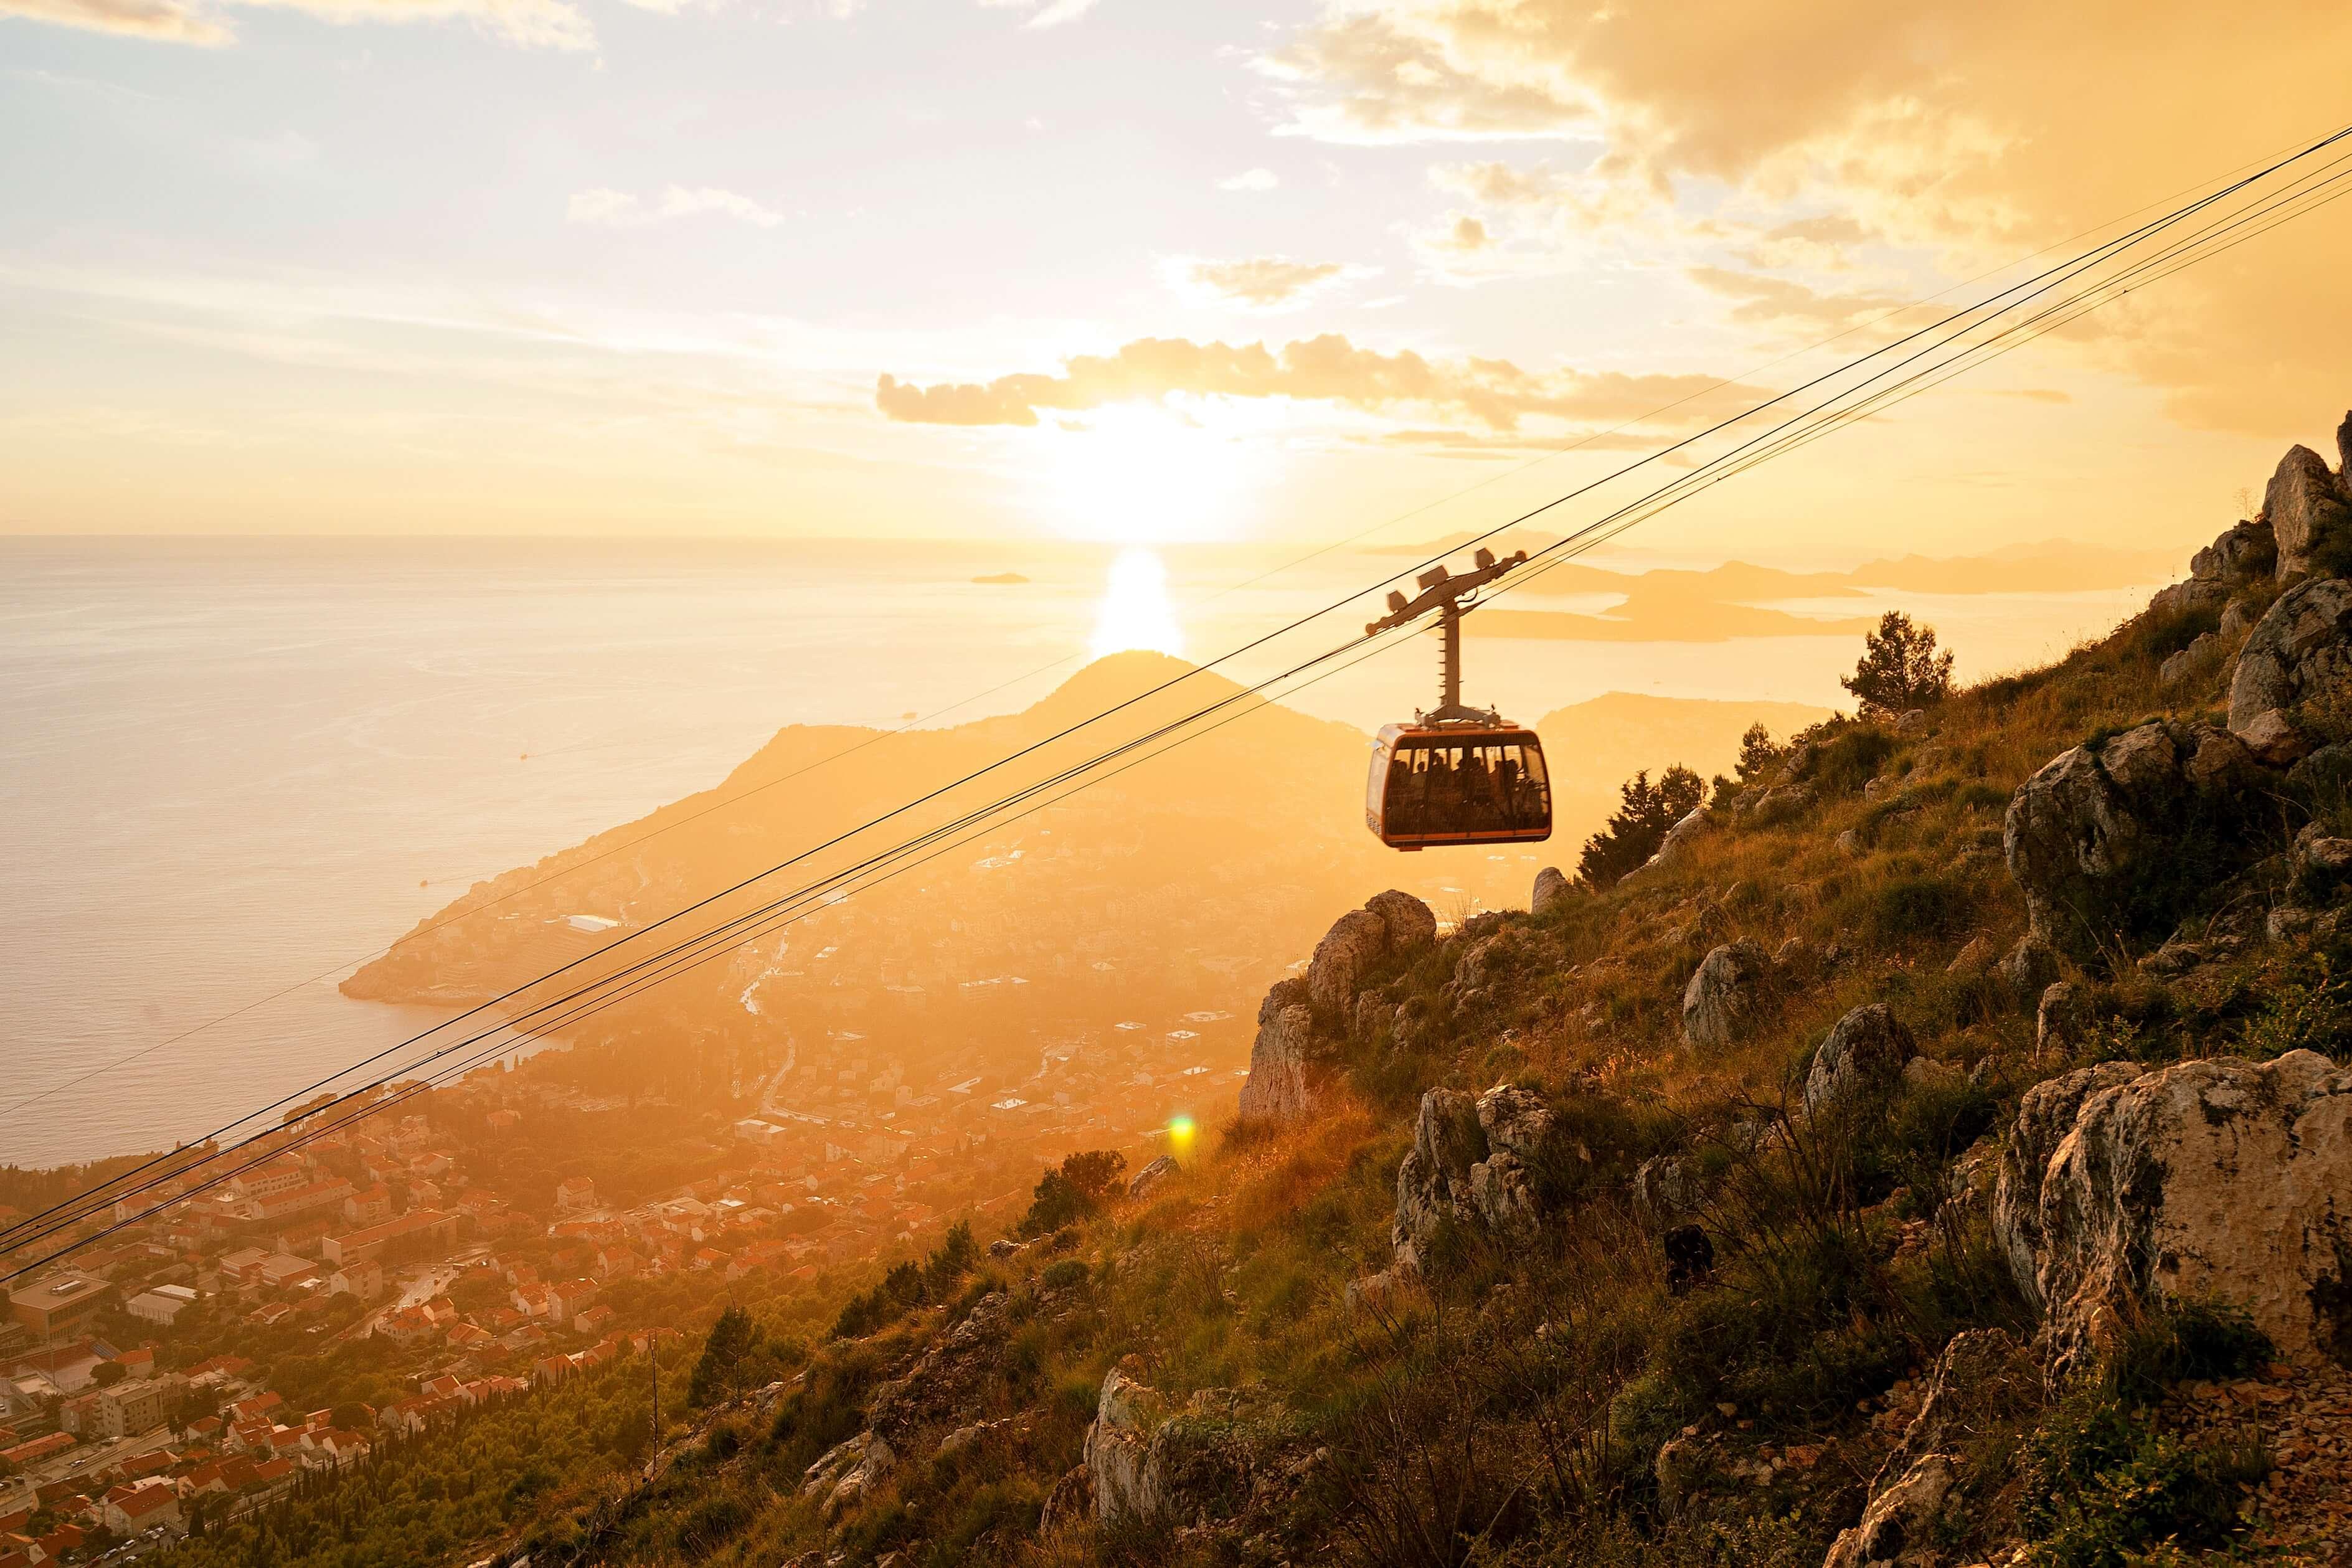 Climb the mountain in a cable car image